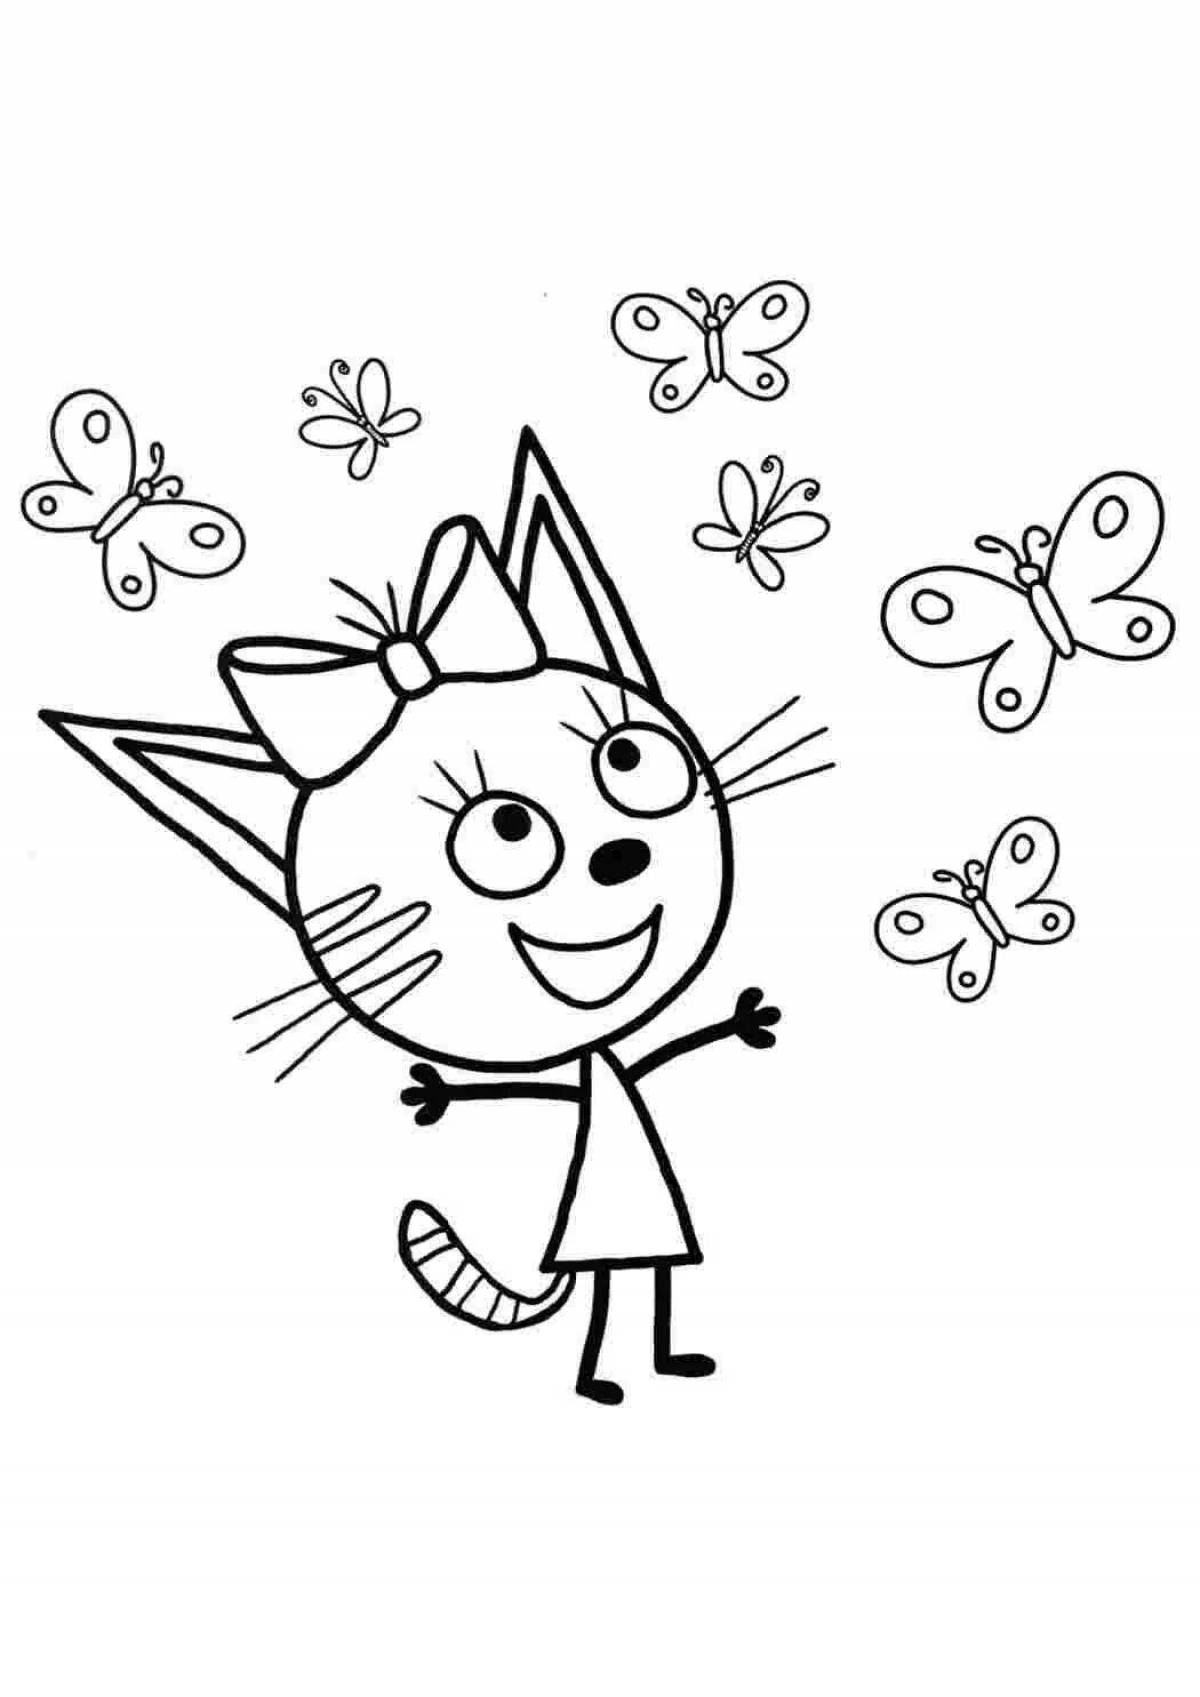 Incredible three cats coloring book for kids